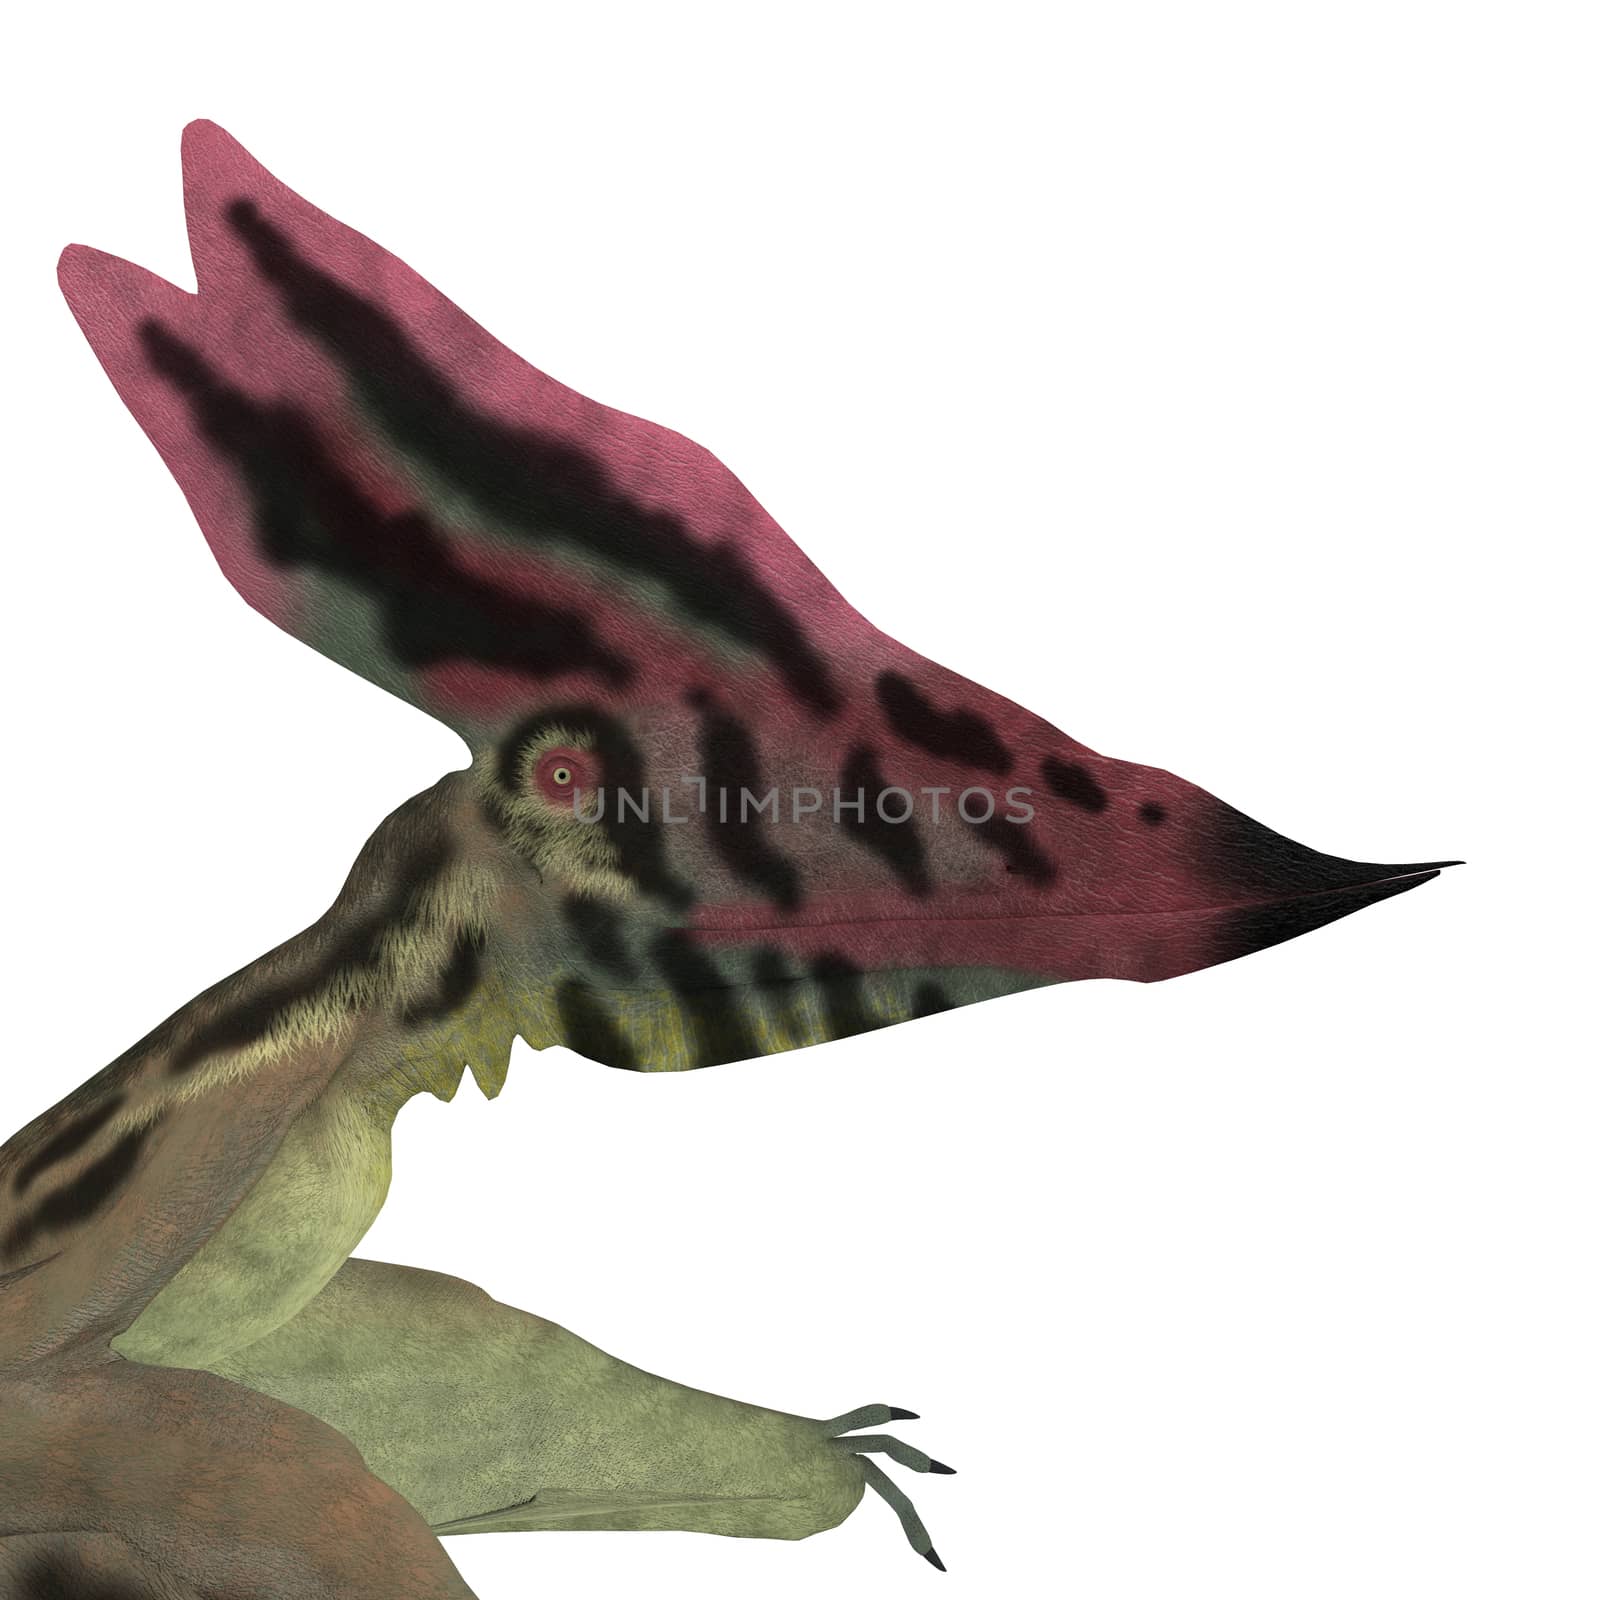 Thalassodromeus was a carnivorous pterosaur that lived in Brazil in the Cretaceous Period.